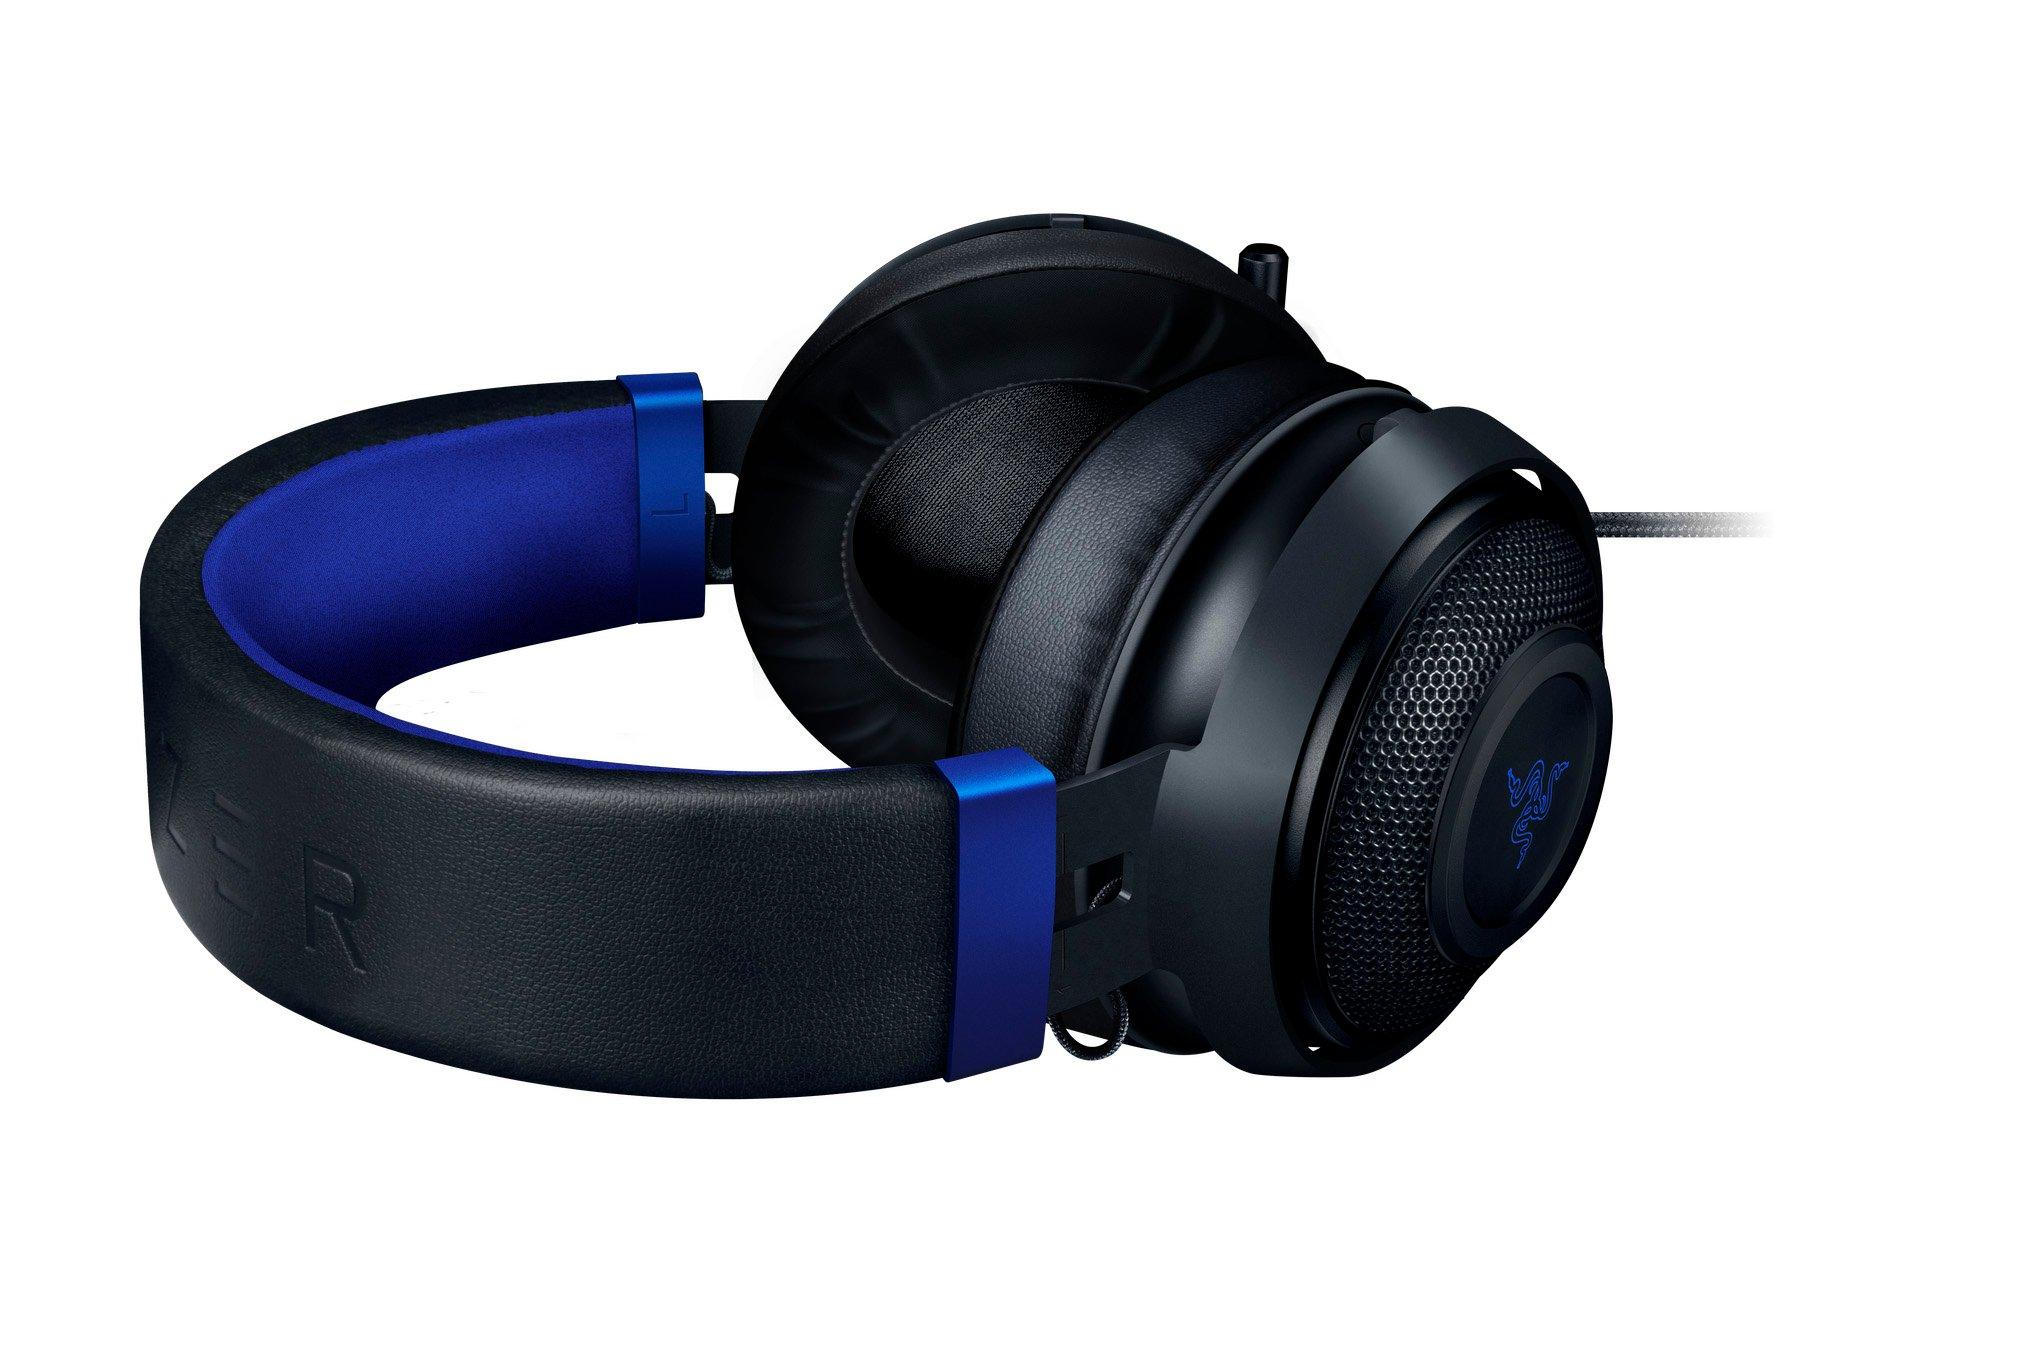 Kraken Wired Gaming Headset for PlayStation 4